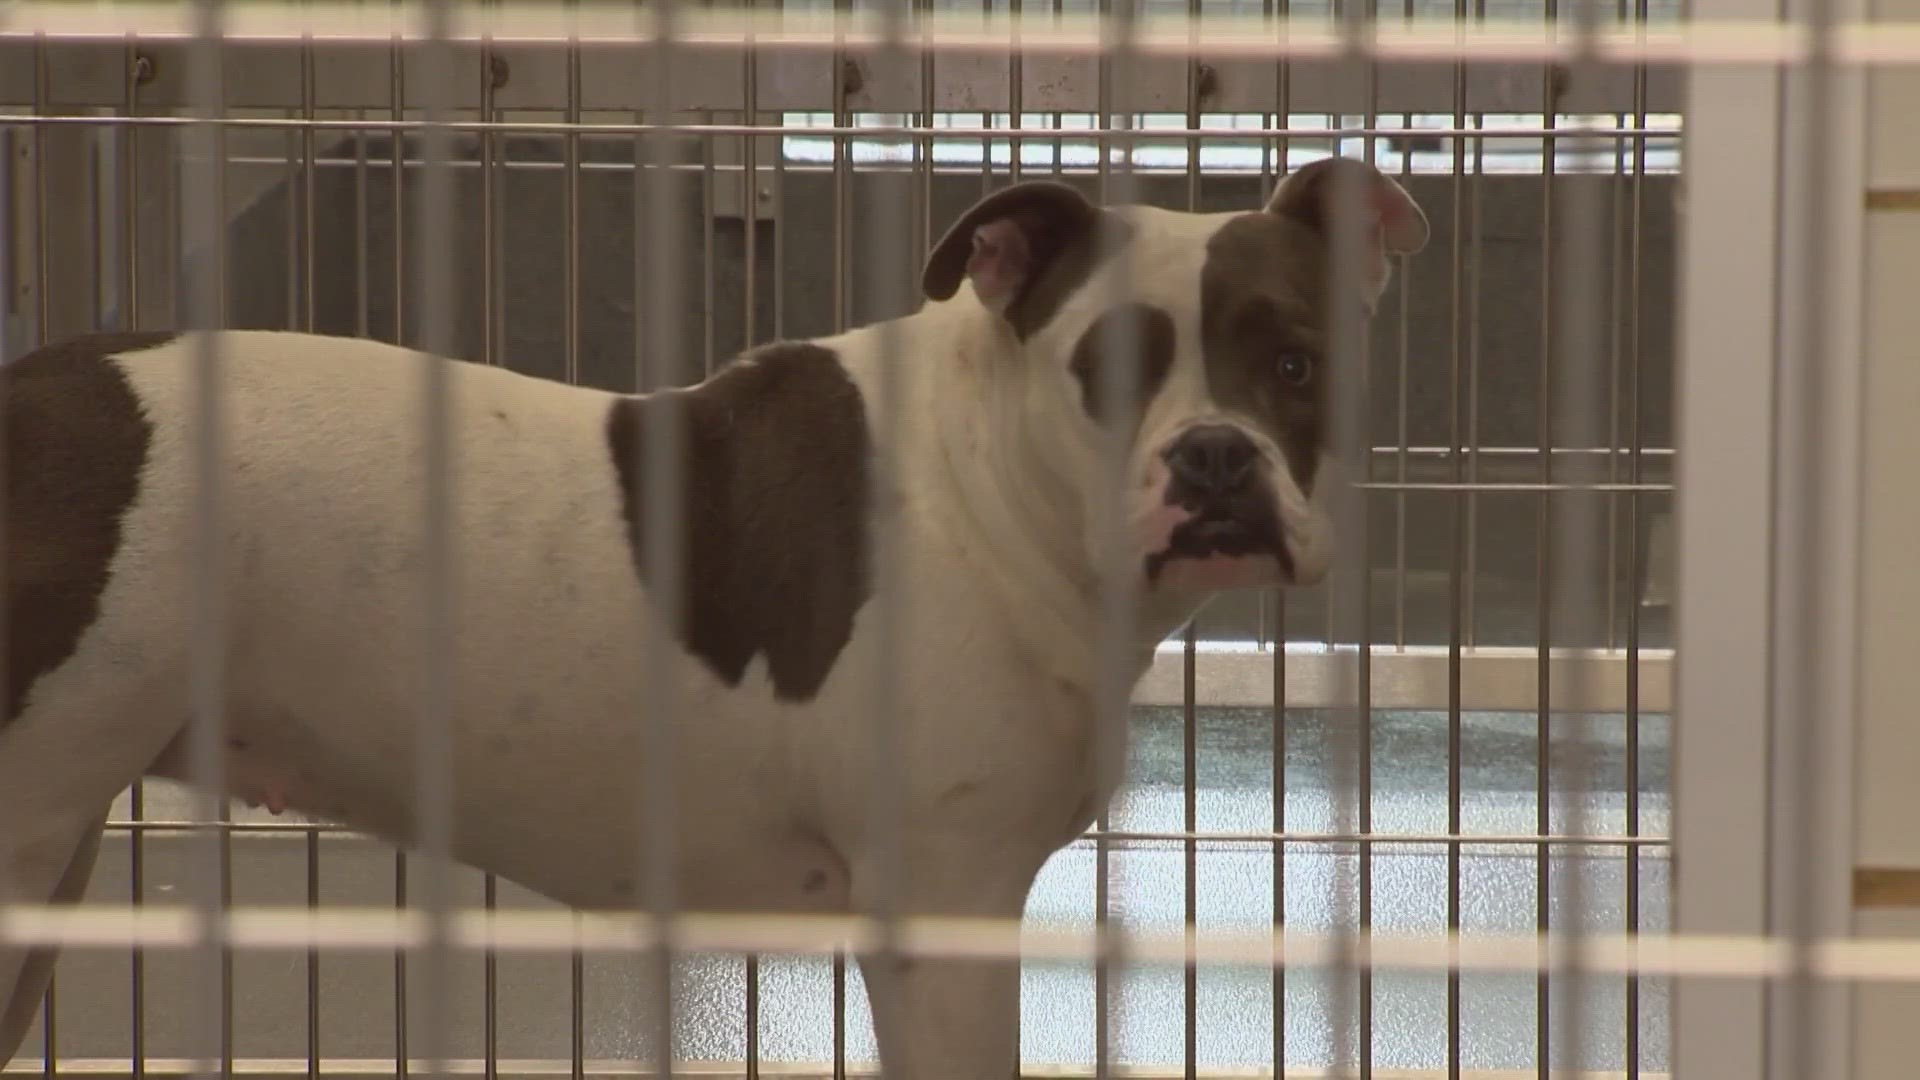 Advocates say they need people to foster and adopt these dogs to help save their lives and make room for more.